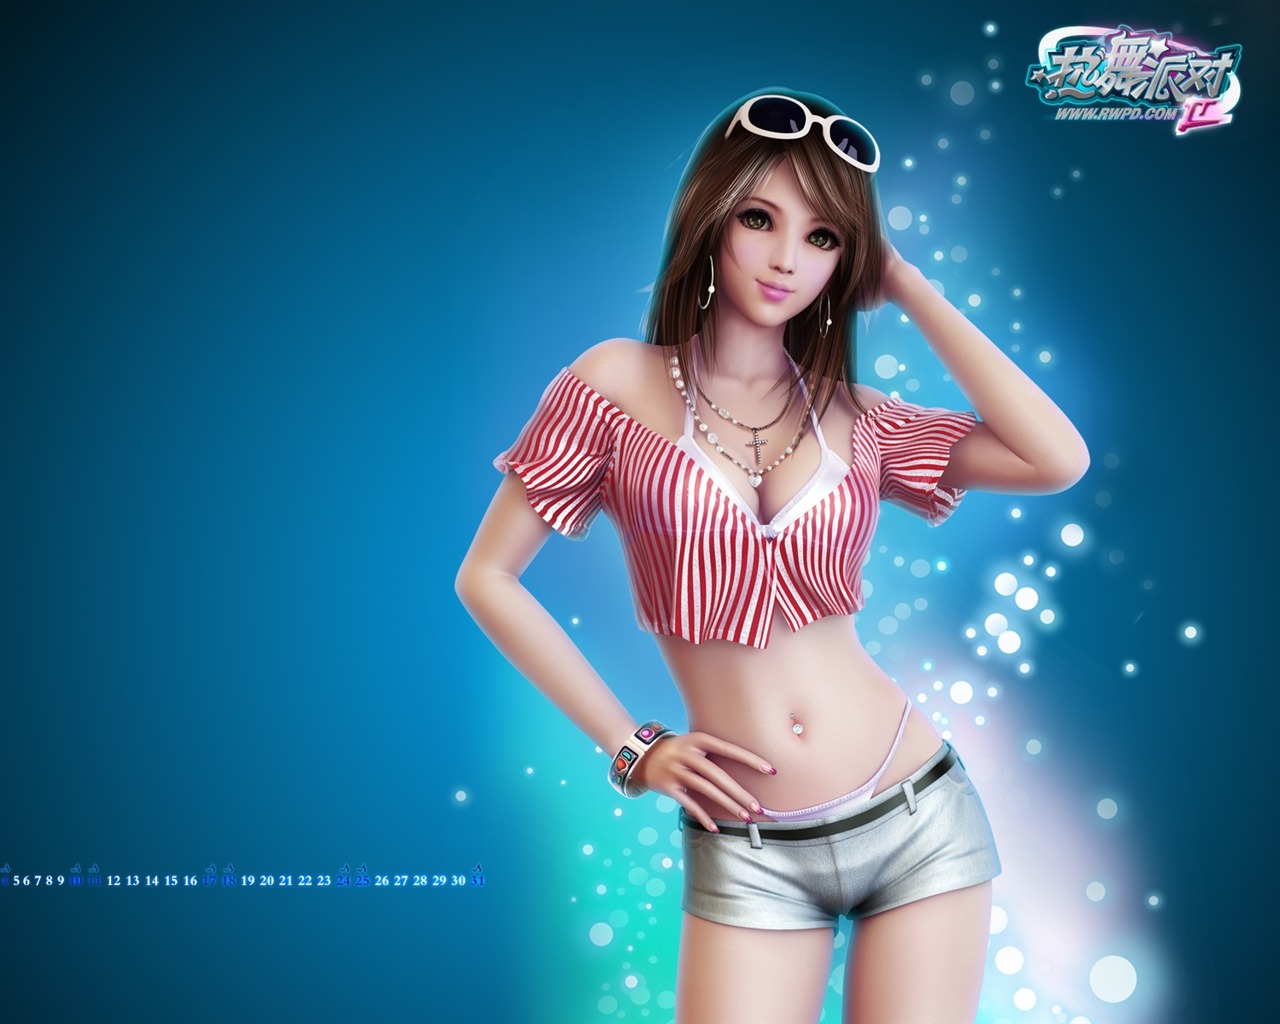 Online game Hot Dance Party II official wallpapers #4 - 1280x1024